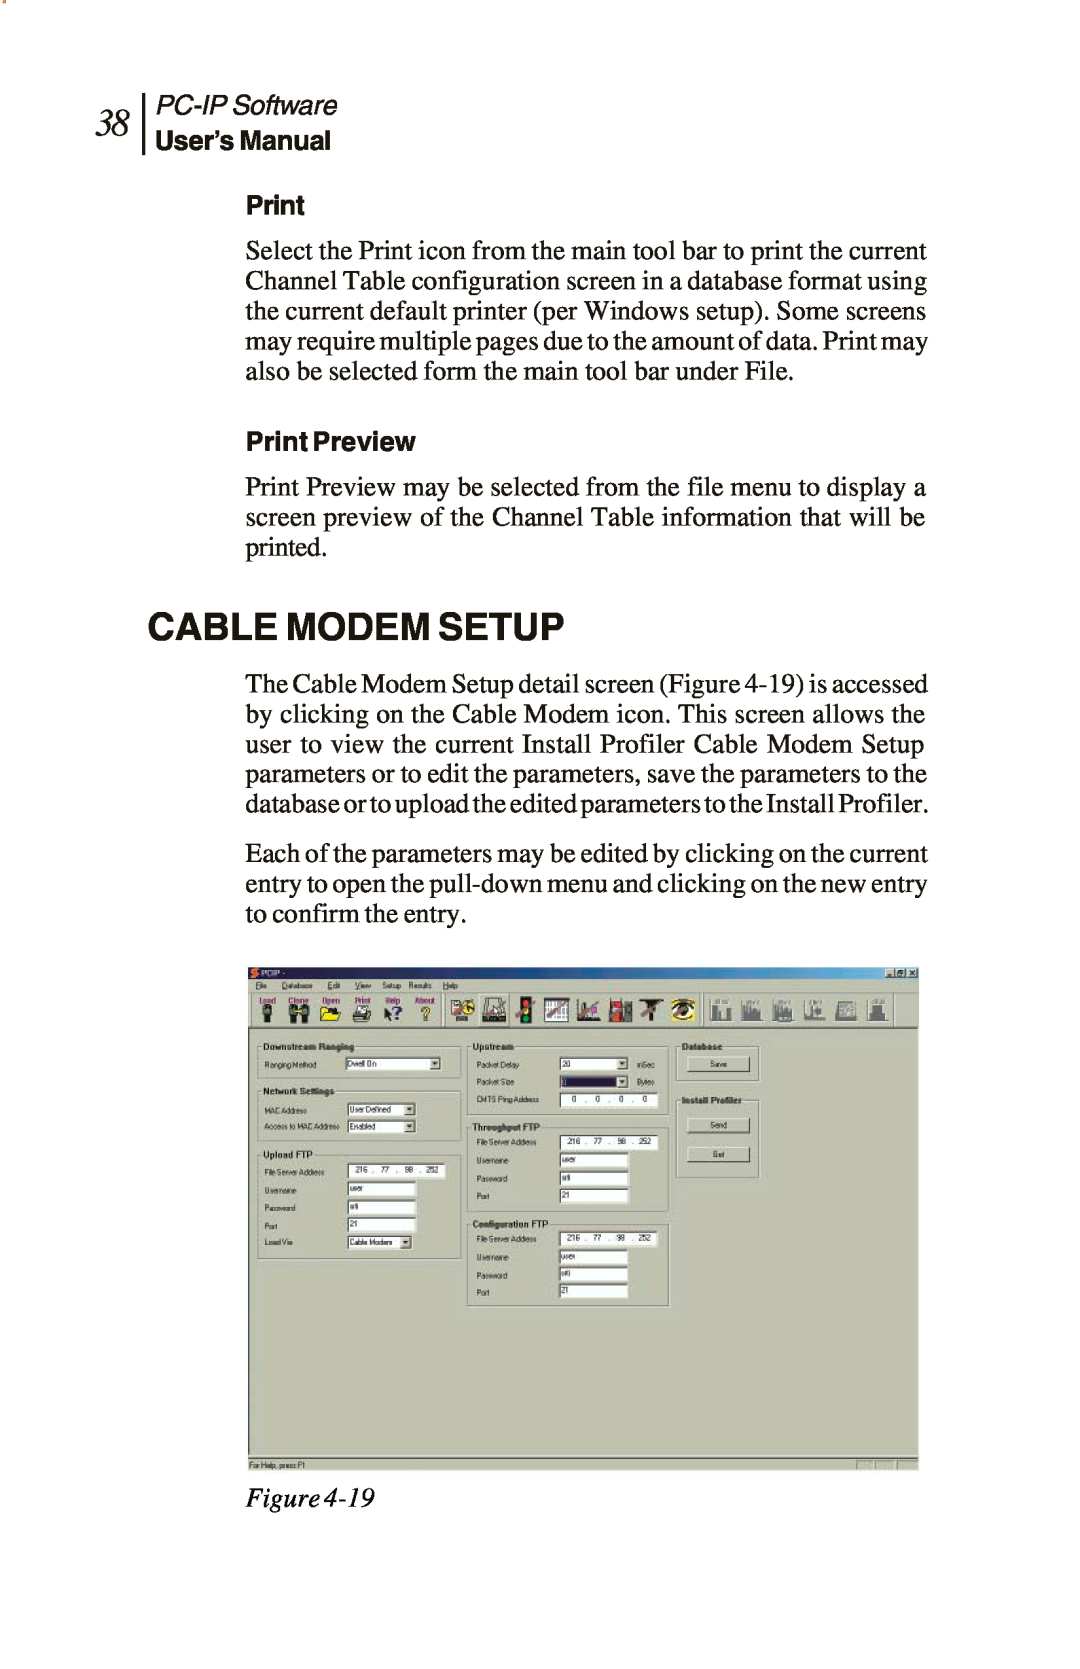 Sunrise Global CM250 IP, CM100 IP, and CM500 IP manual Cable Modem Setup, Print Preview, PC-IPSoftware, User’s Manual, Figure 